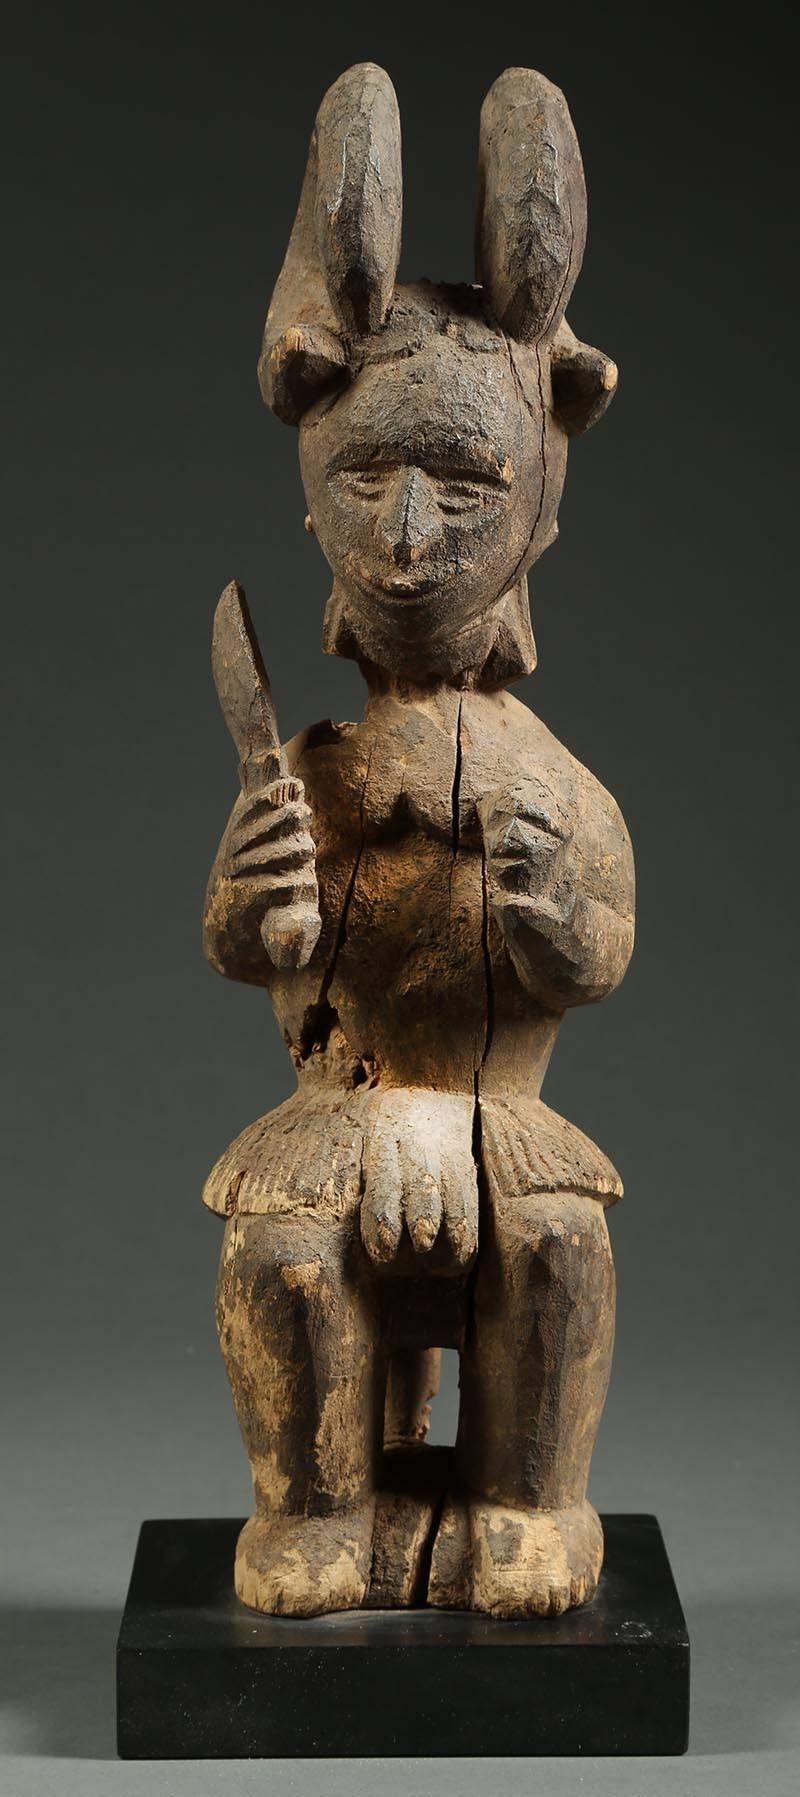 Igbo tribal seated Ikenga figure with sword and head Africa, Nigeria

Classic Ikenga Shrine figure seated on a stool with curved horns encircling his head. Areas of erosion, weathered surface and insect damage from age. Ex- Tom Slater, ex- private